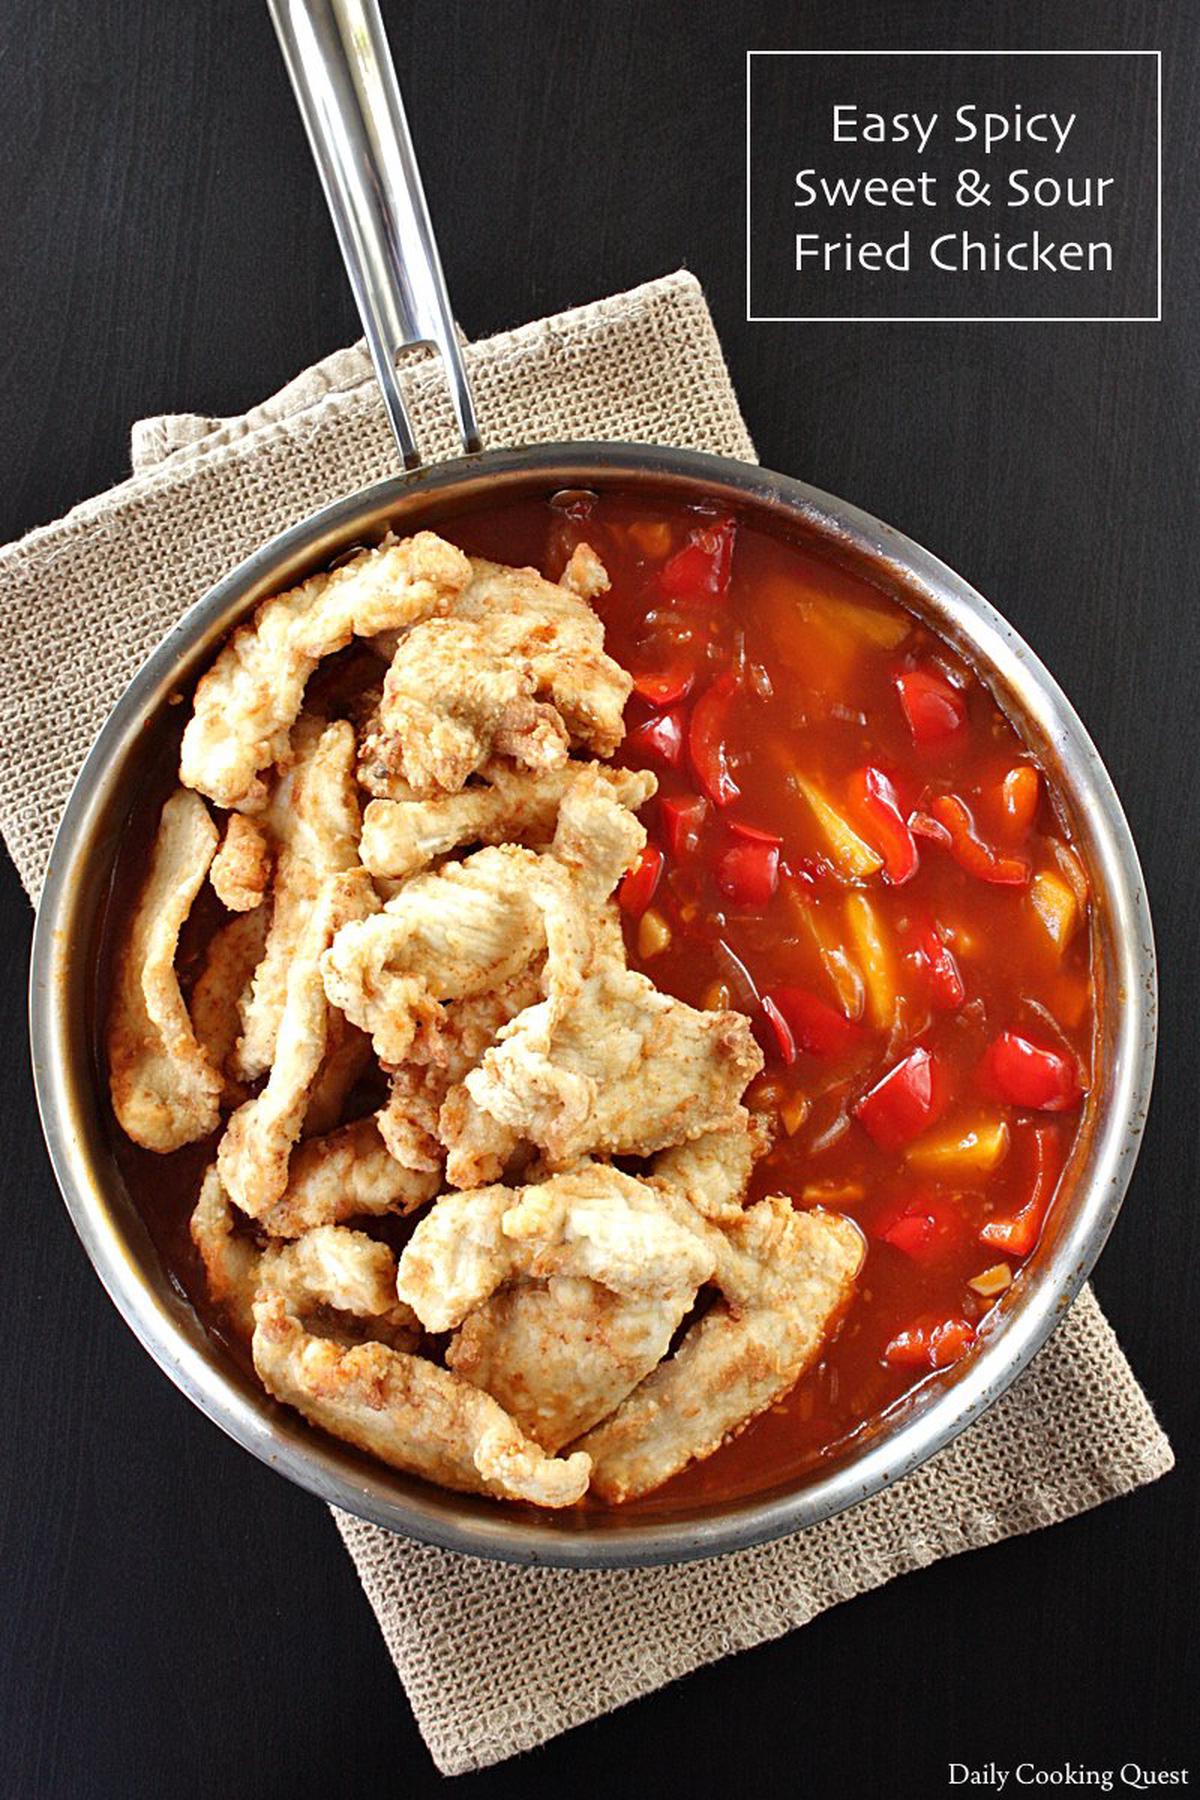 Easy Spicy Sweet and Sour Fried Chicken